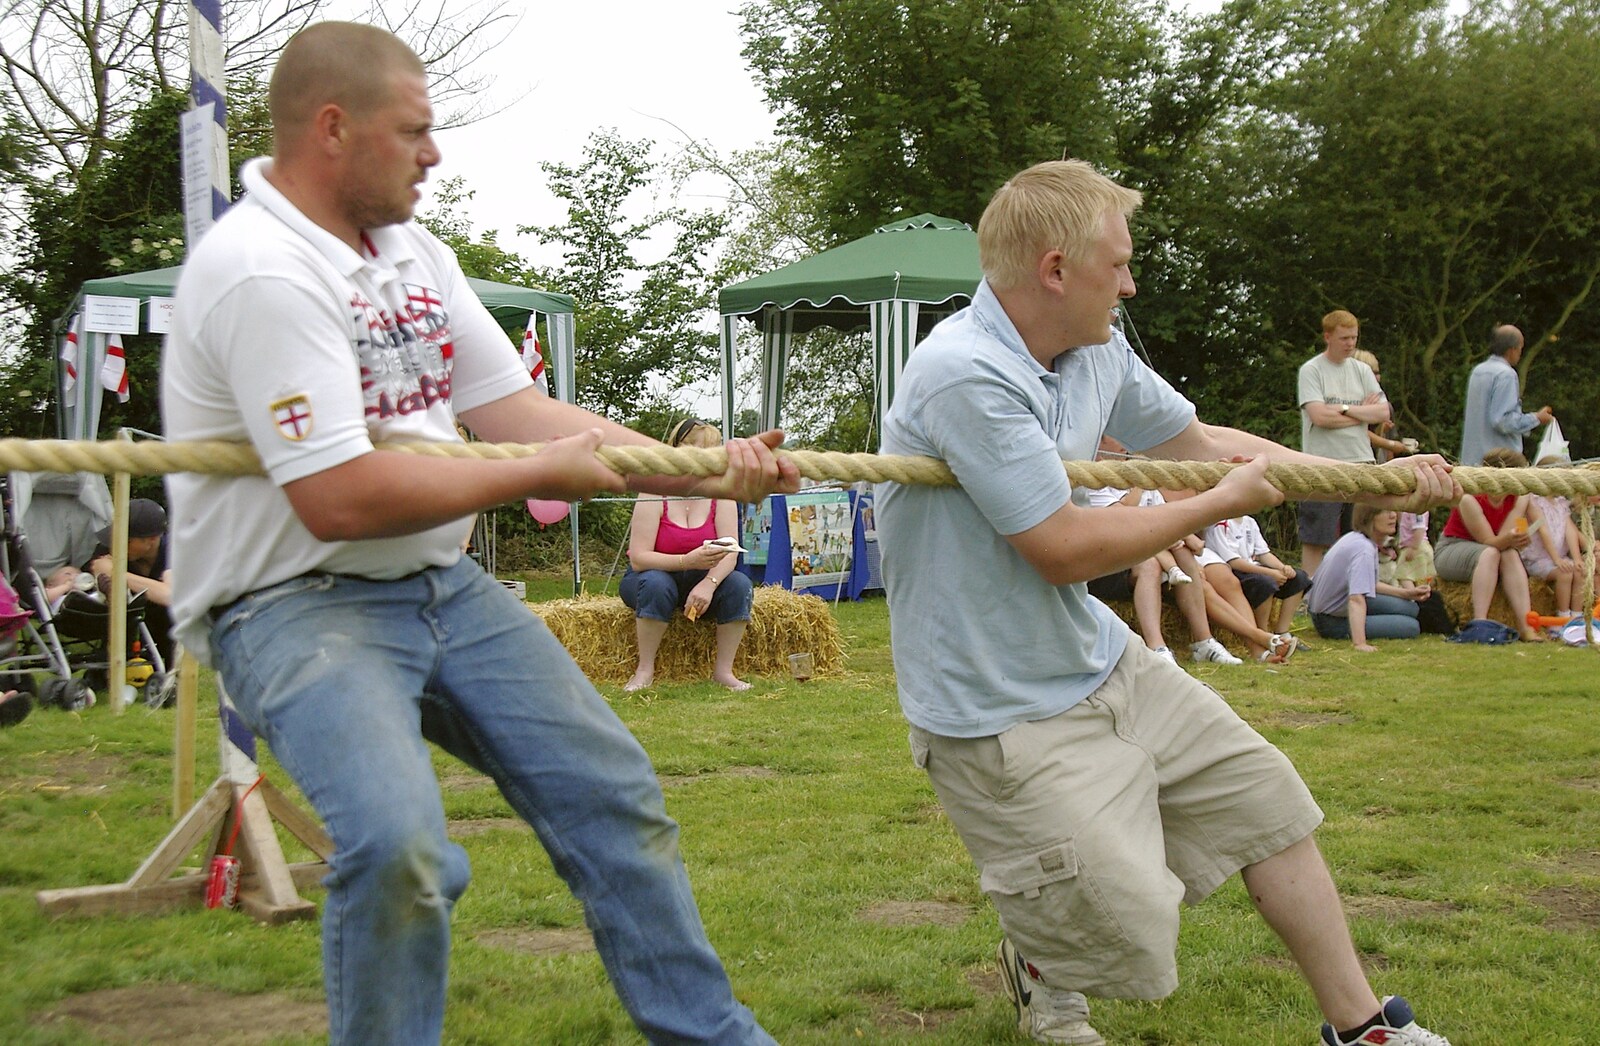 A tug of war occurs from The Village Fête, Yaxley, Suffolk - 18th June 2006